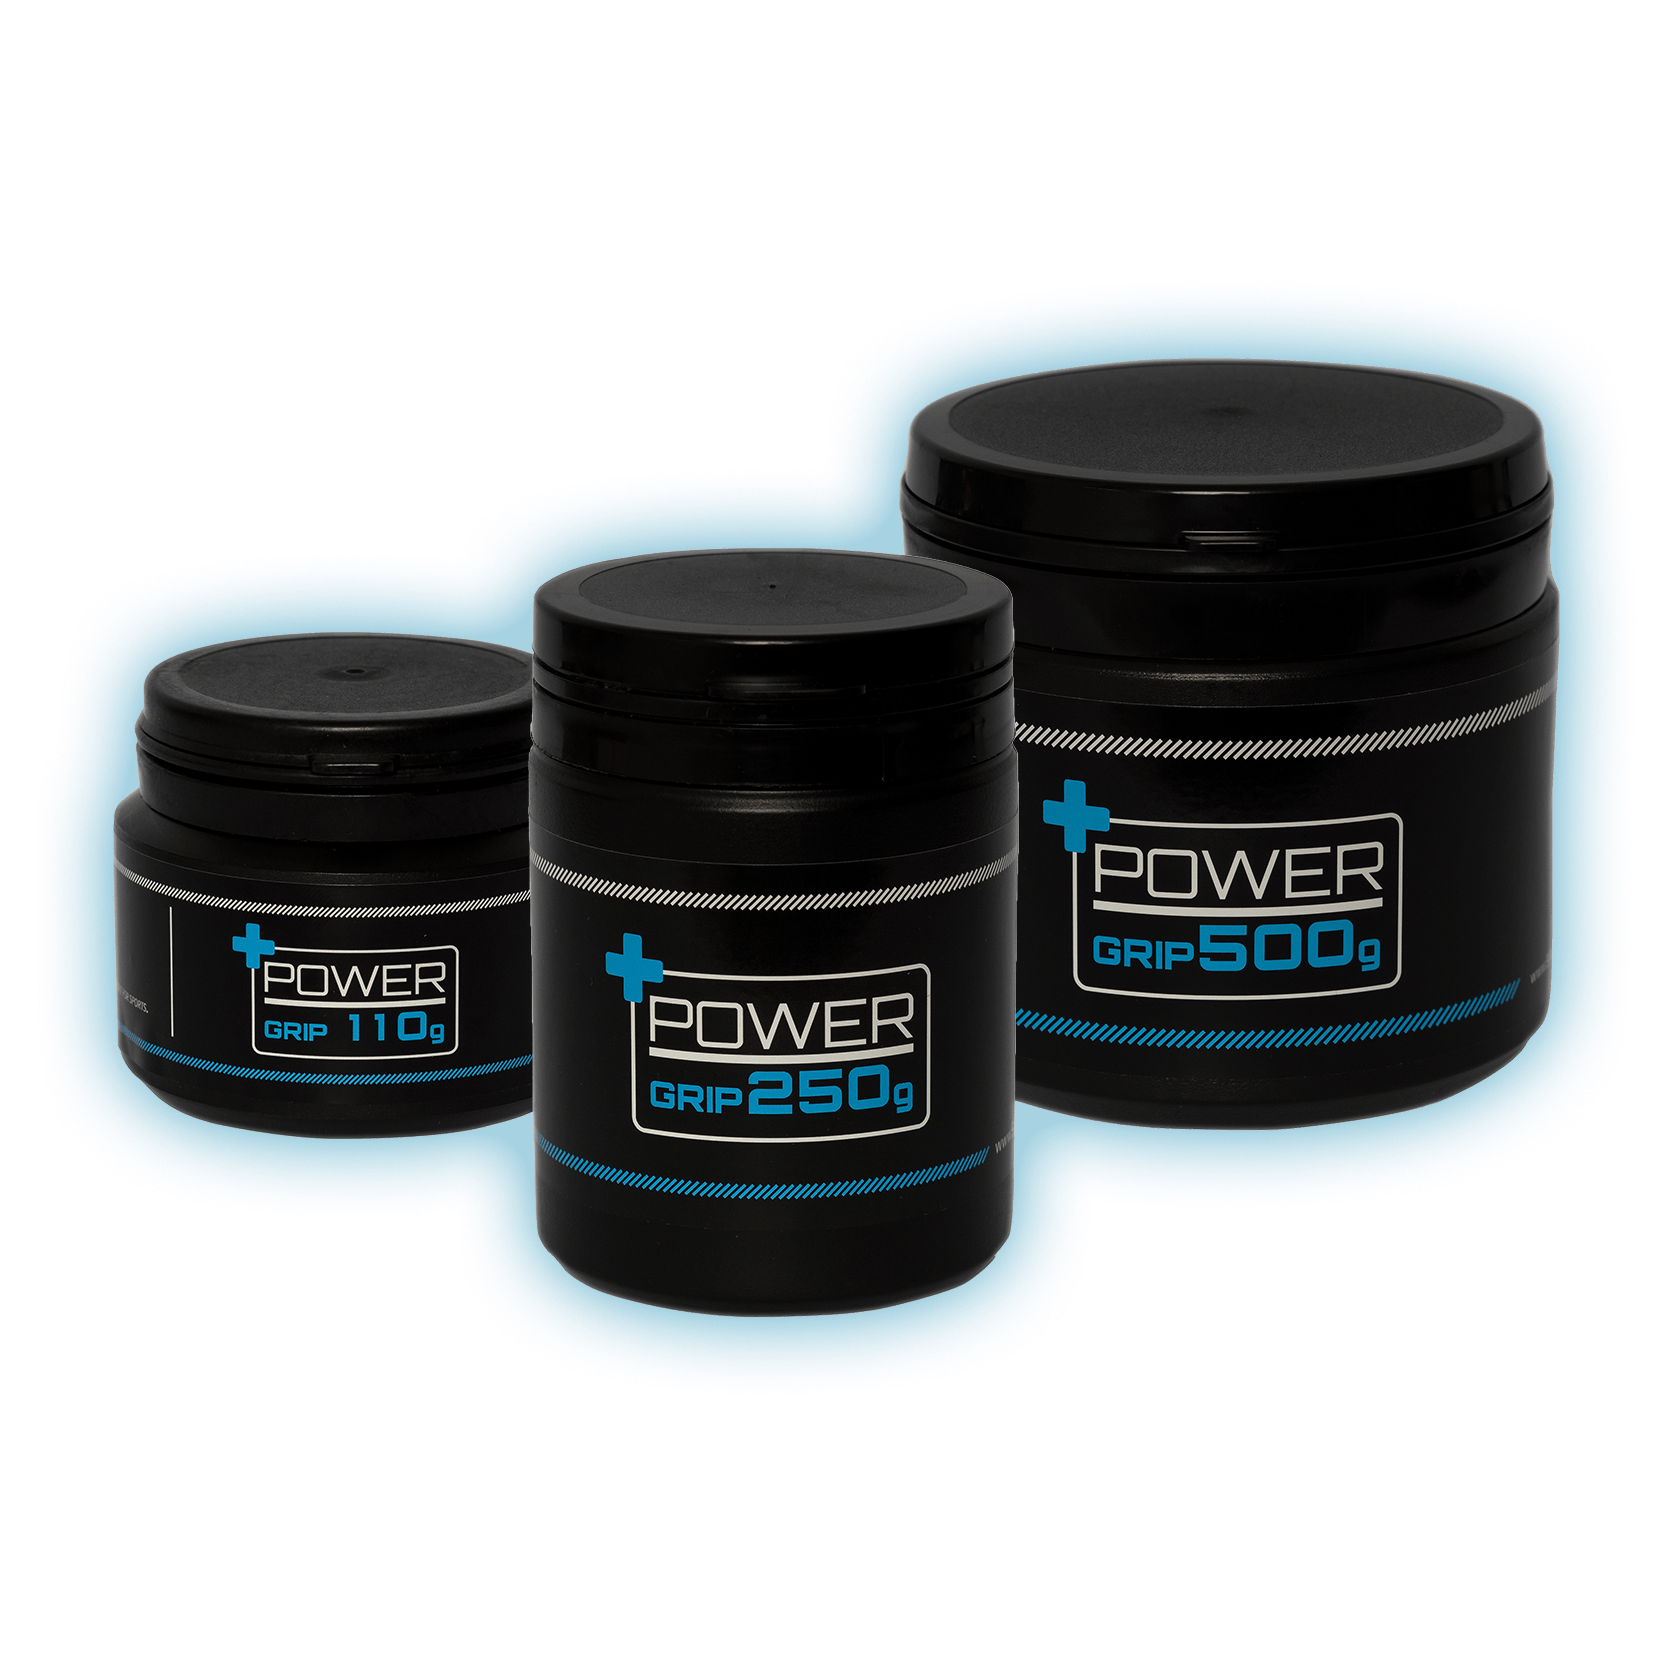 POWER GRIP (110G / 250G / 500G) - SPORTADD - YOUR BENEFIT FOR SPORTS